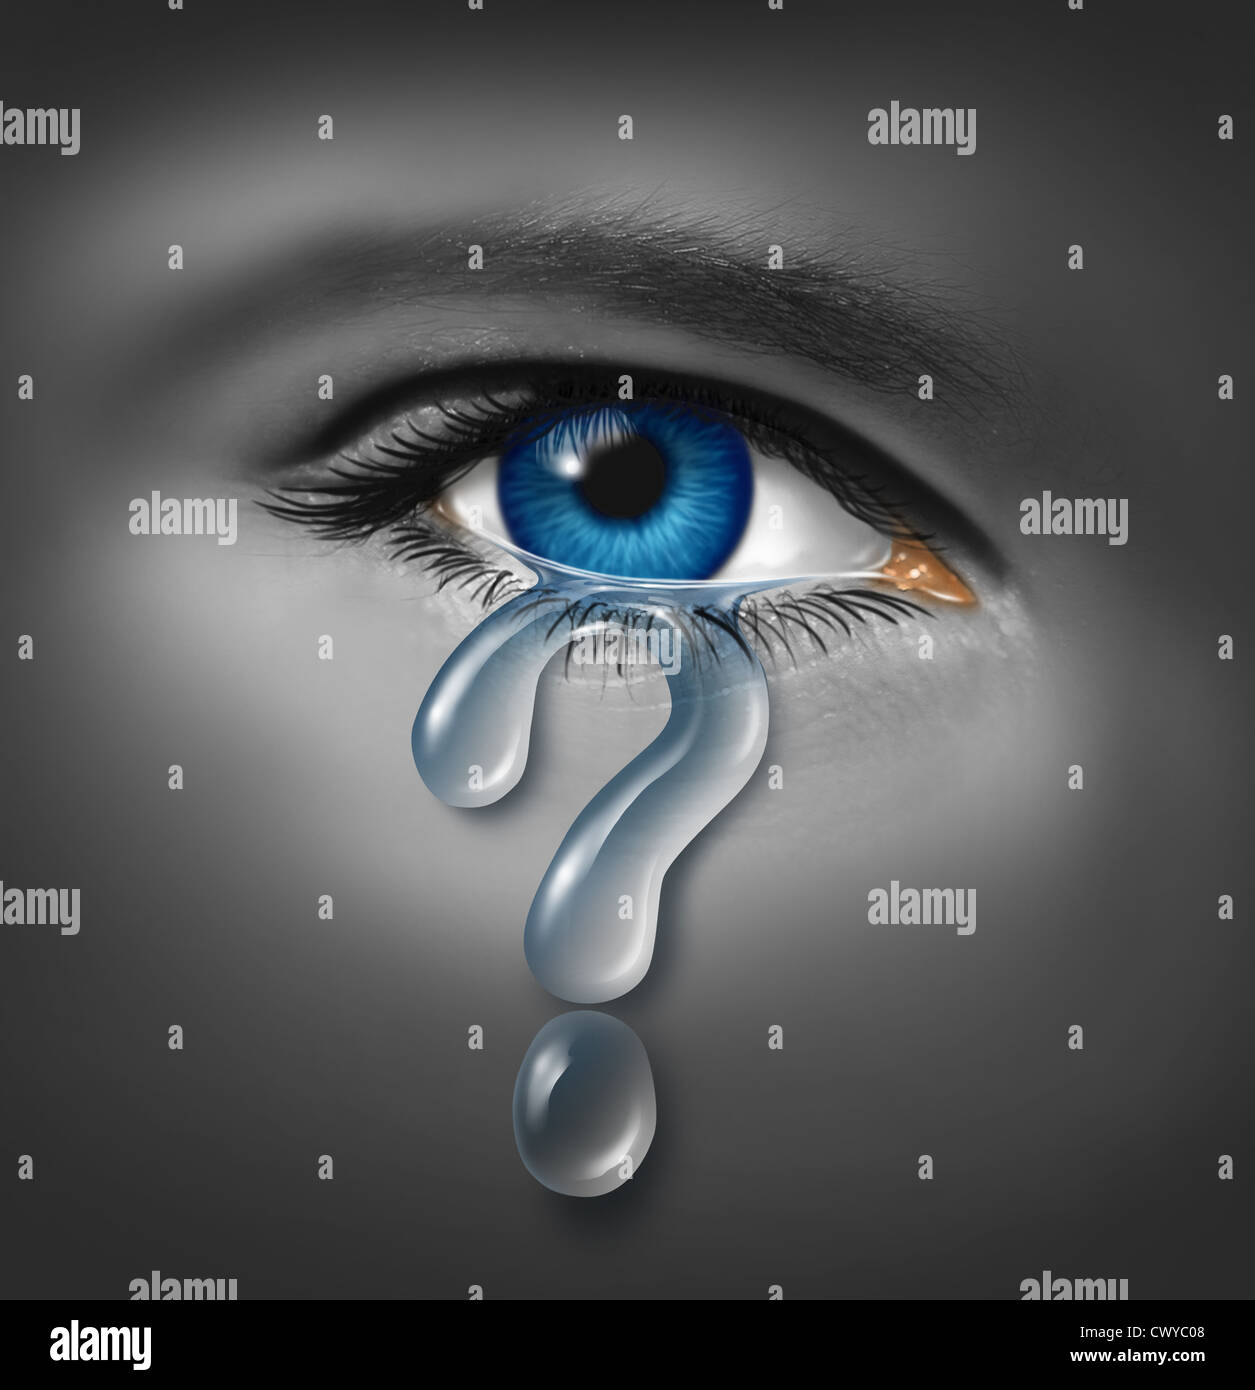 Depression Symptoms and understanding the mood swings that result in feeling sad and down caused by stress helplessness and hopelessness with a close up of a human eye with a crying tear drop in the shape of a question mark. Stock Photo